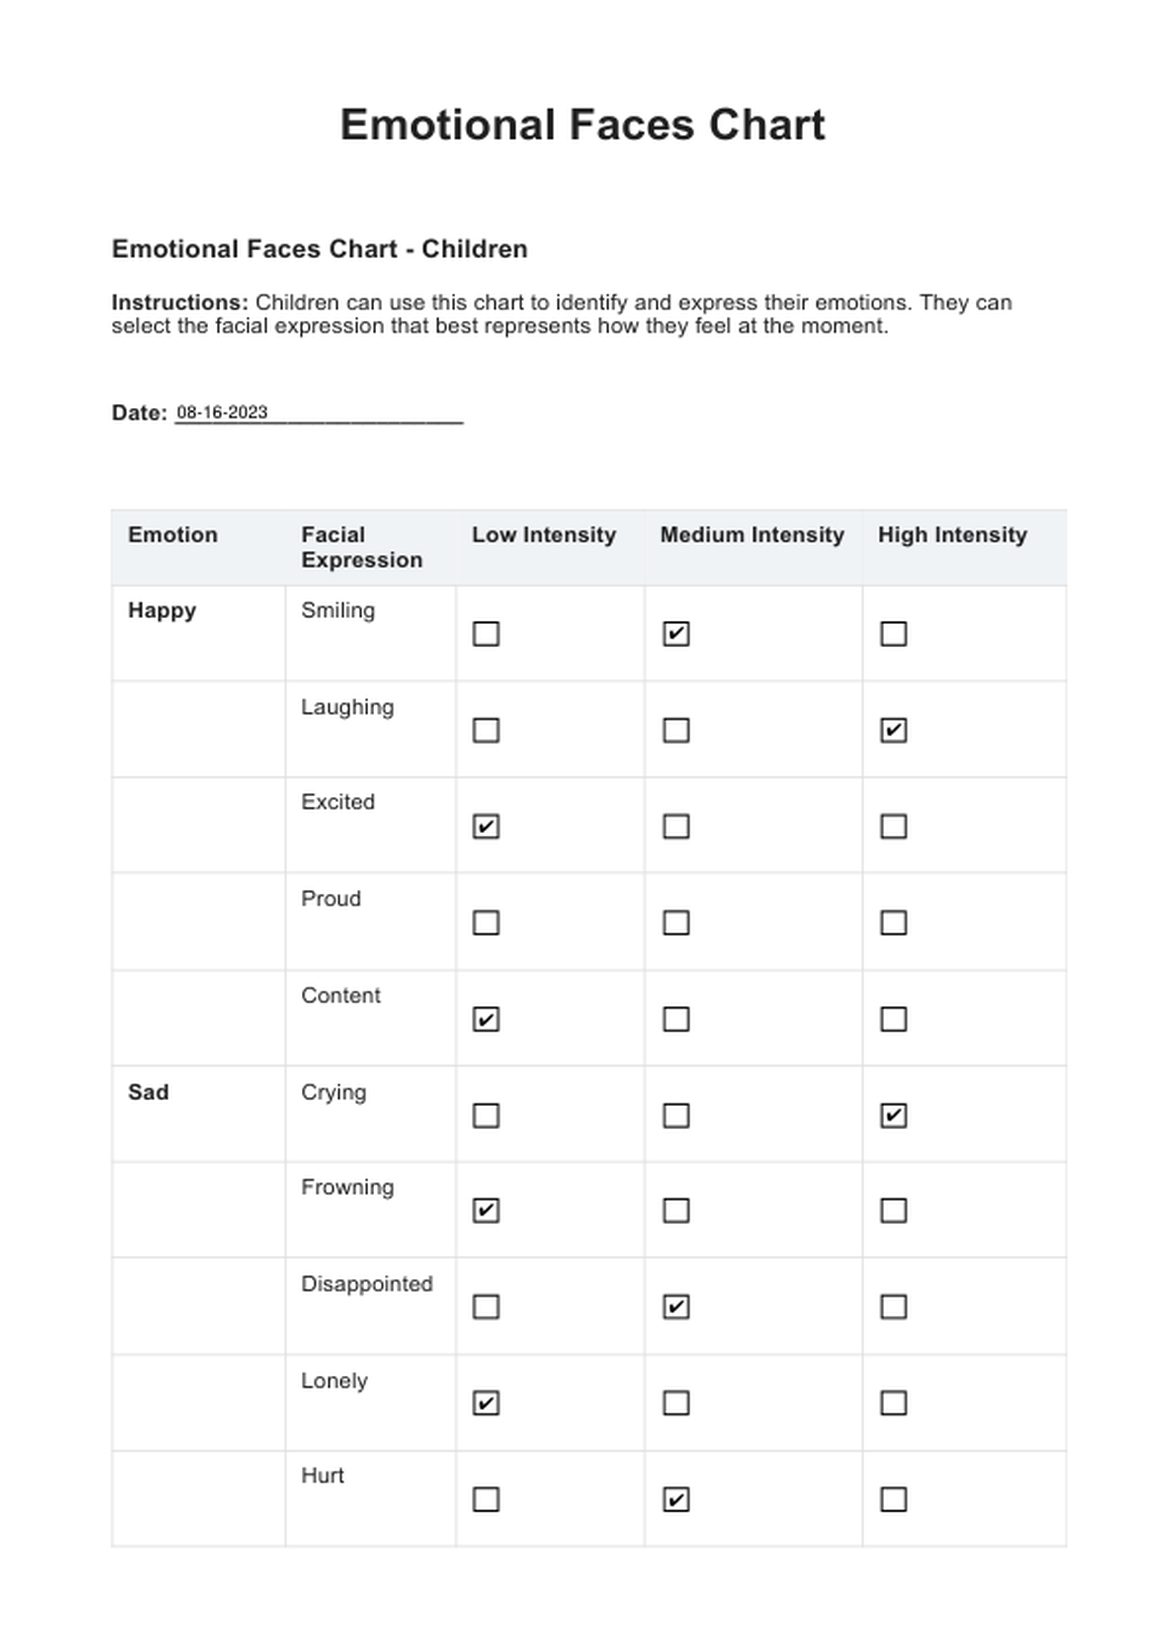 Emotional Faces Chart PDF Example